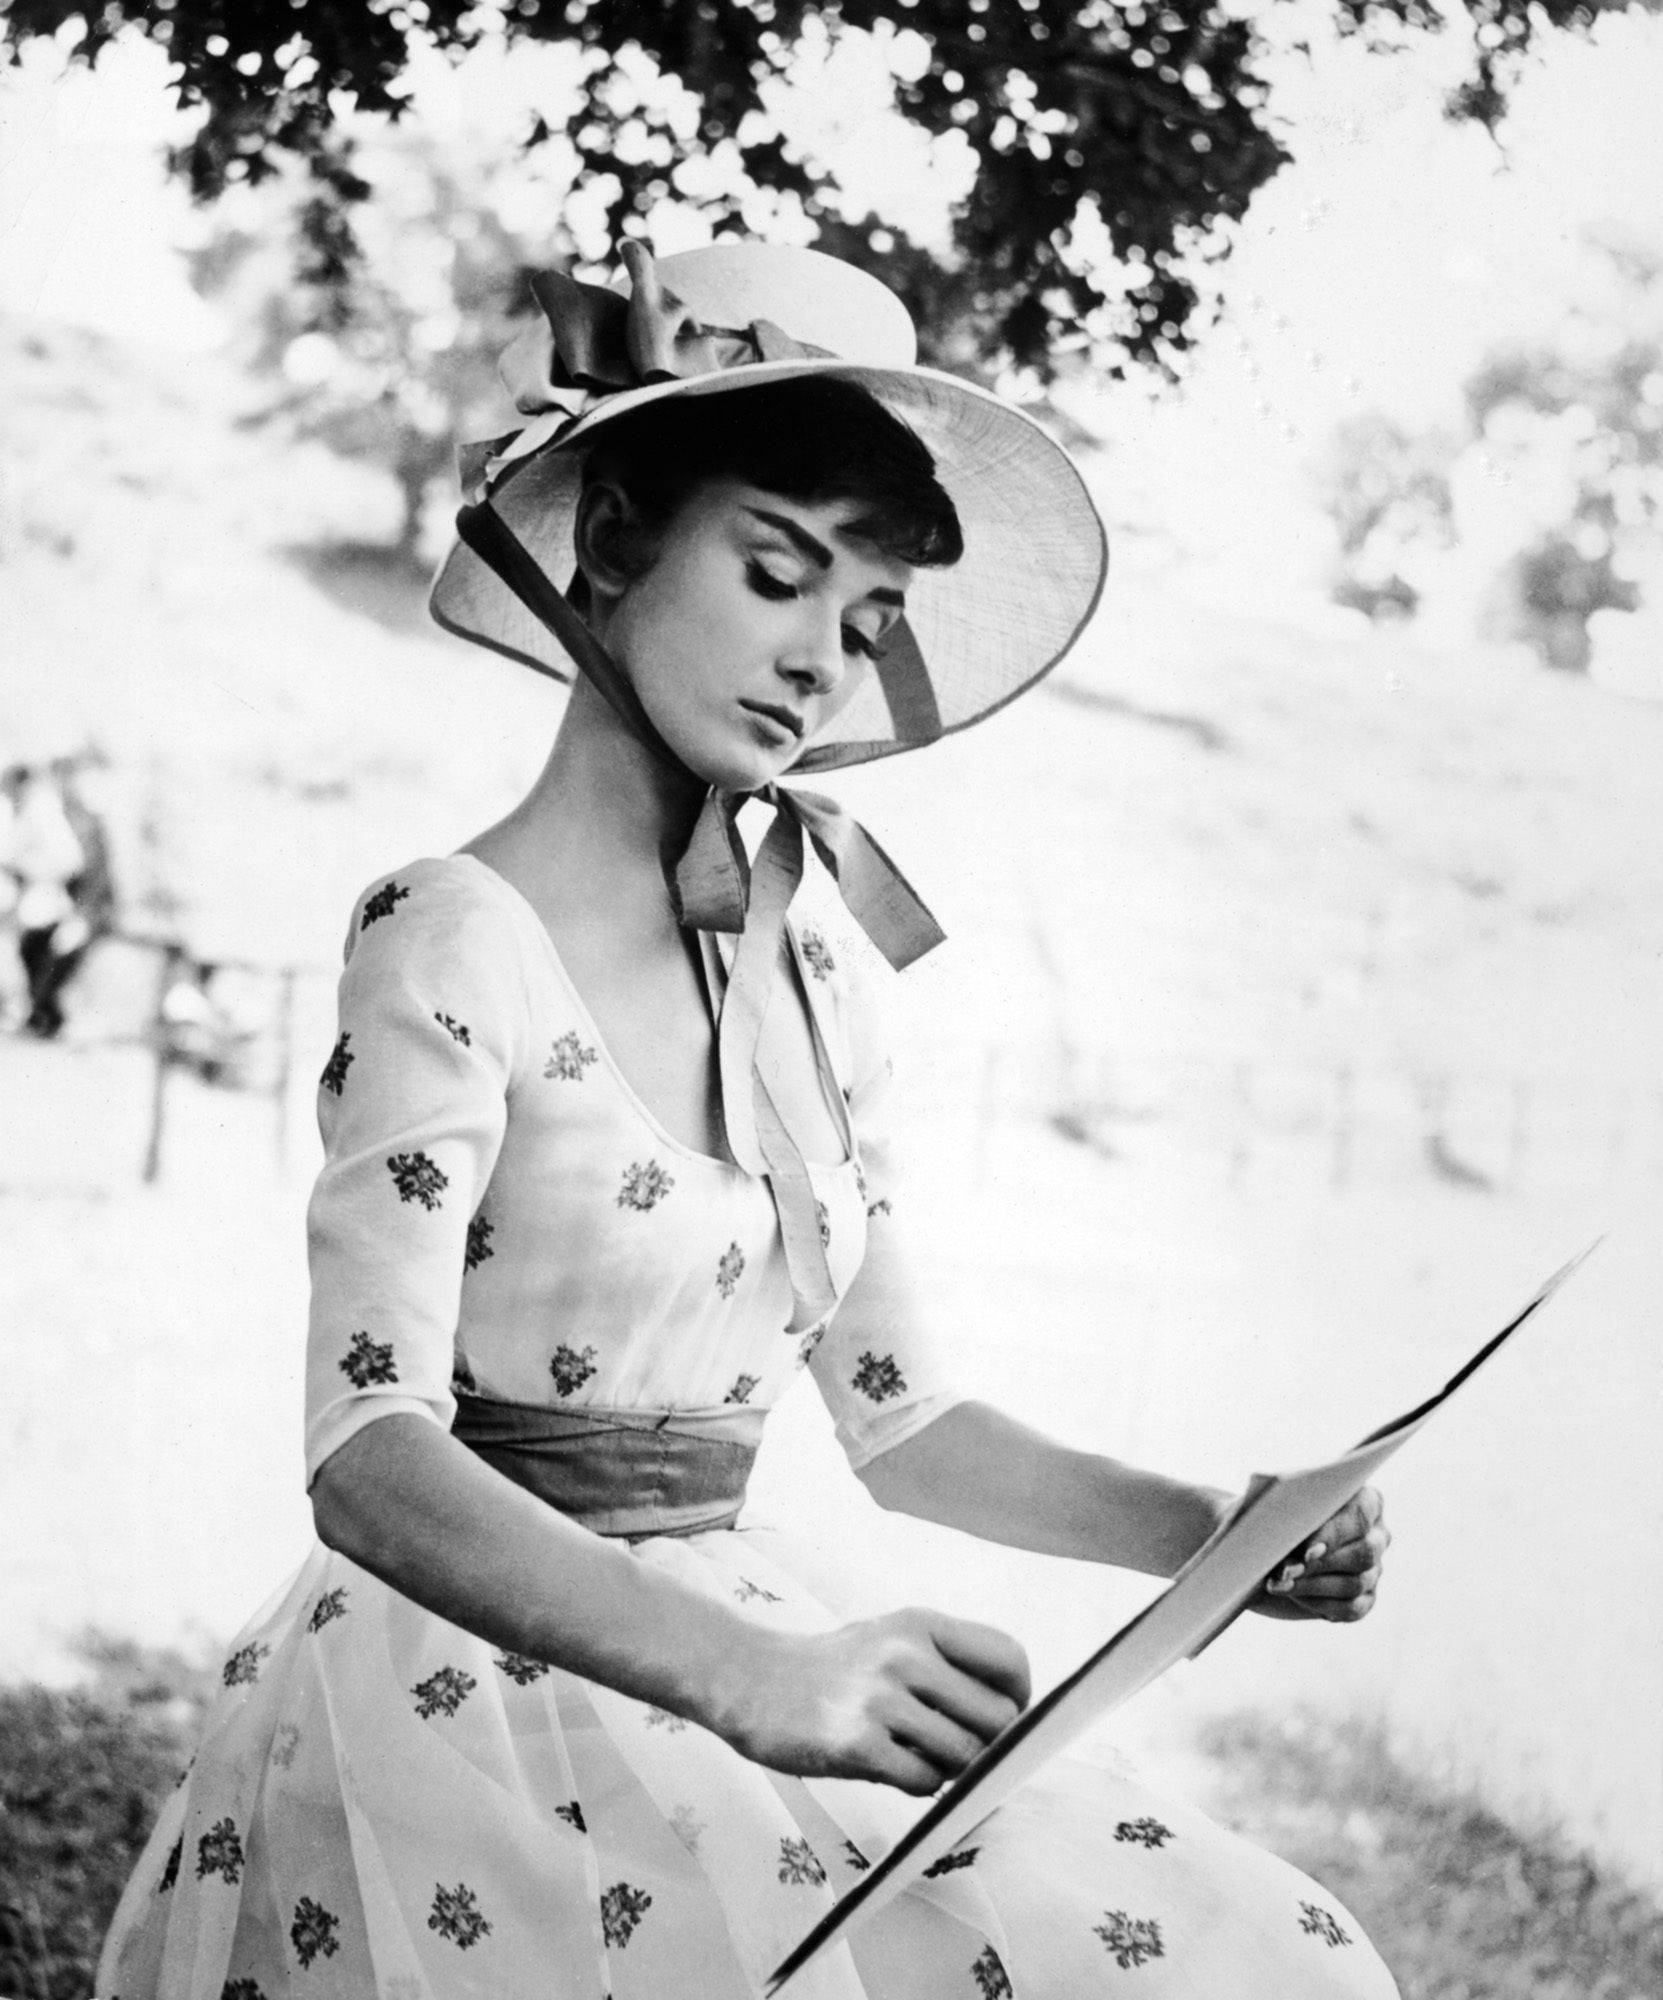 Audrey Hepburn in floral dress in film War and Peace